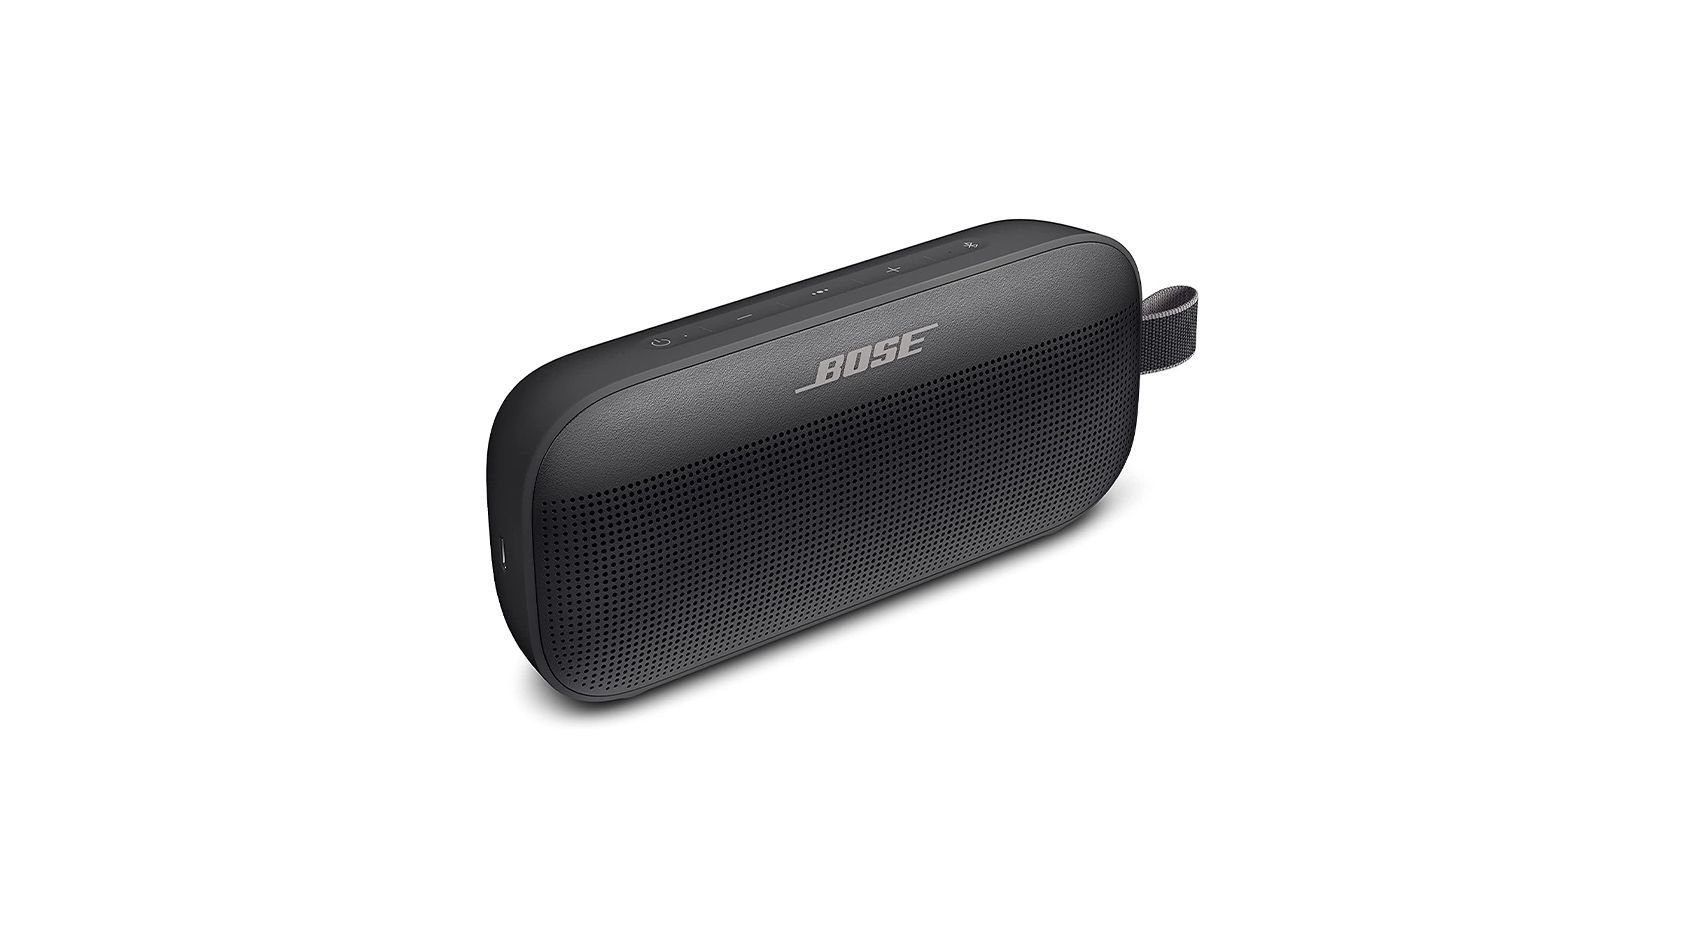 An angled shot of a Bose SoundLink Flex Bluetooth speaker showing the grille, carrying loop, and logo.